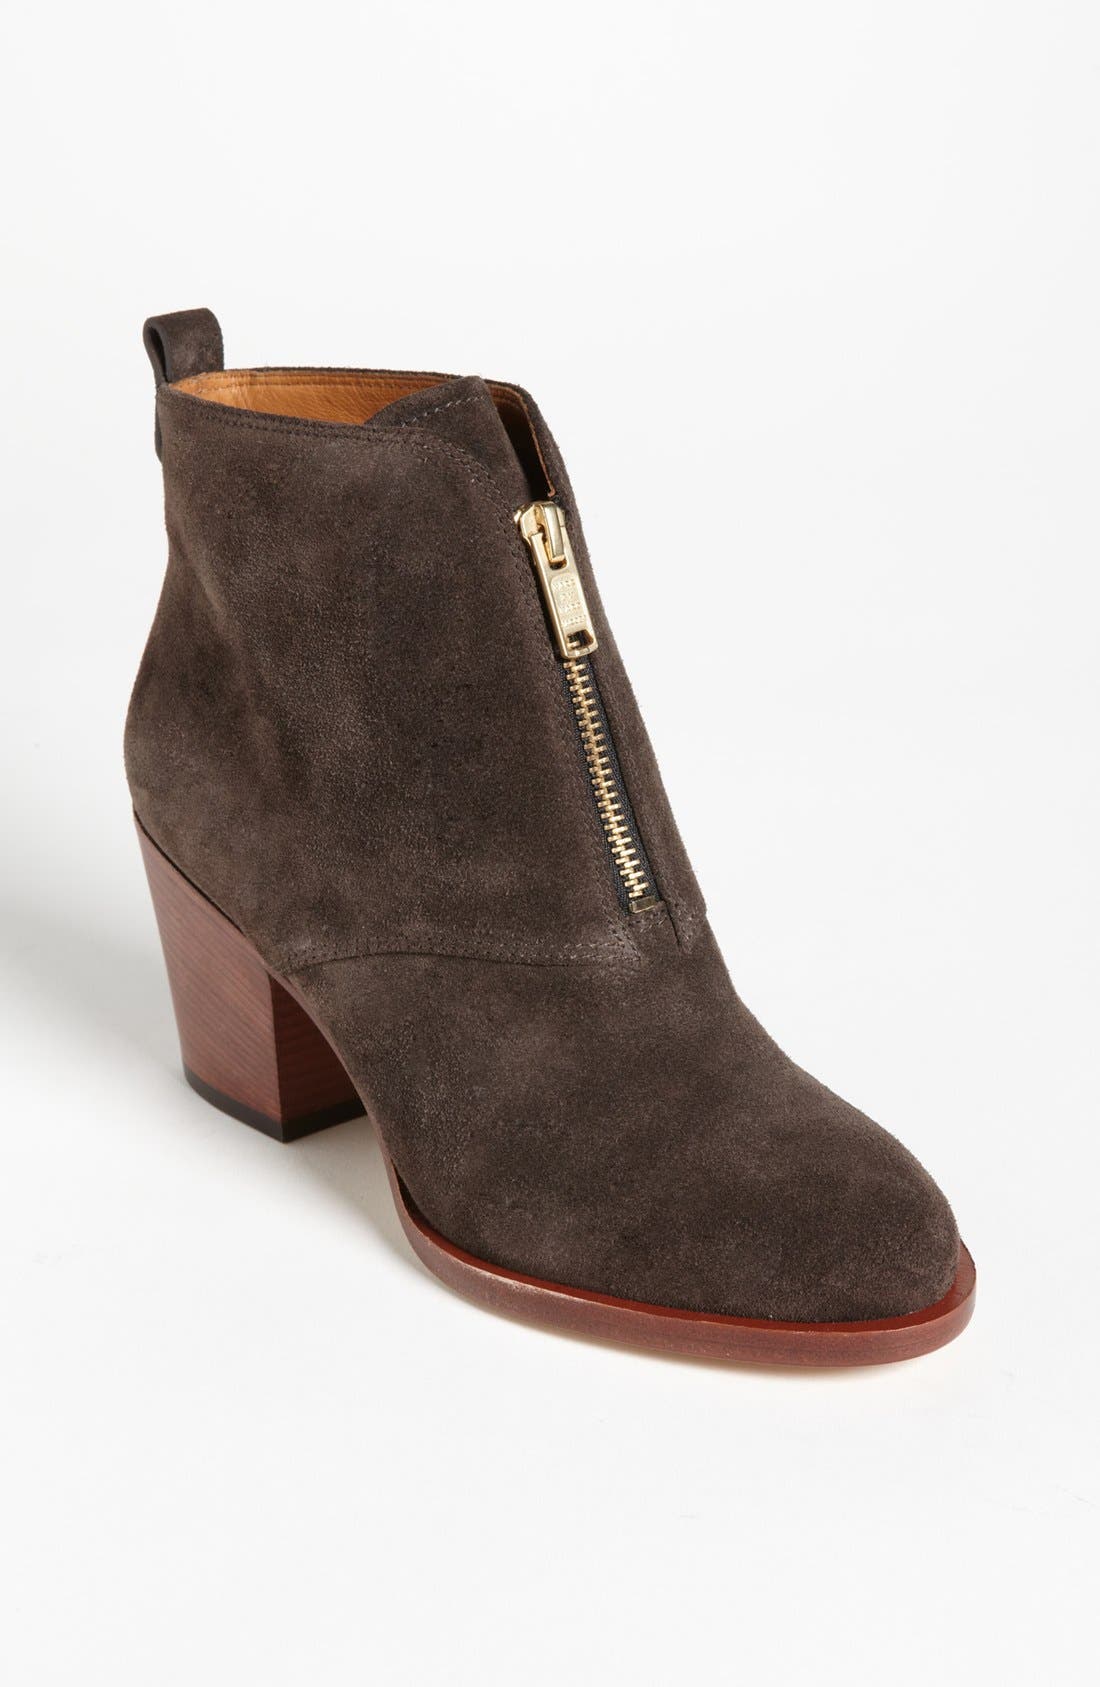 MARC BY MARC JACOBS Ankle Boot | Nordstrom